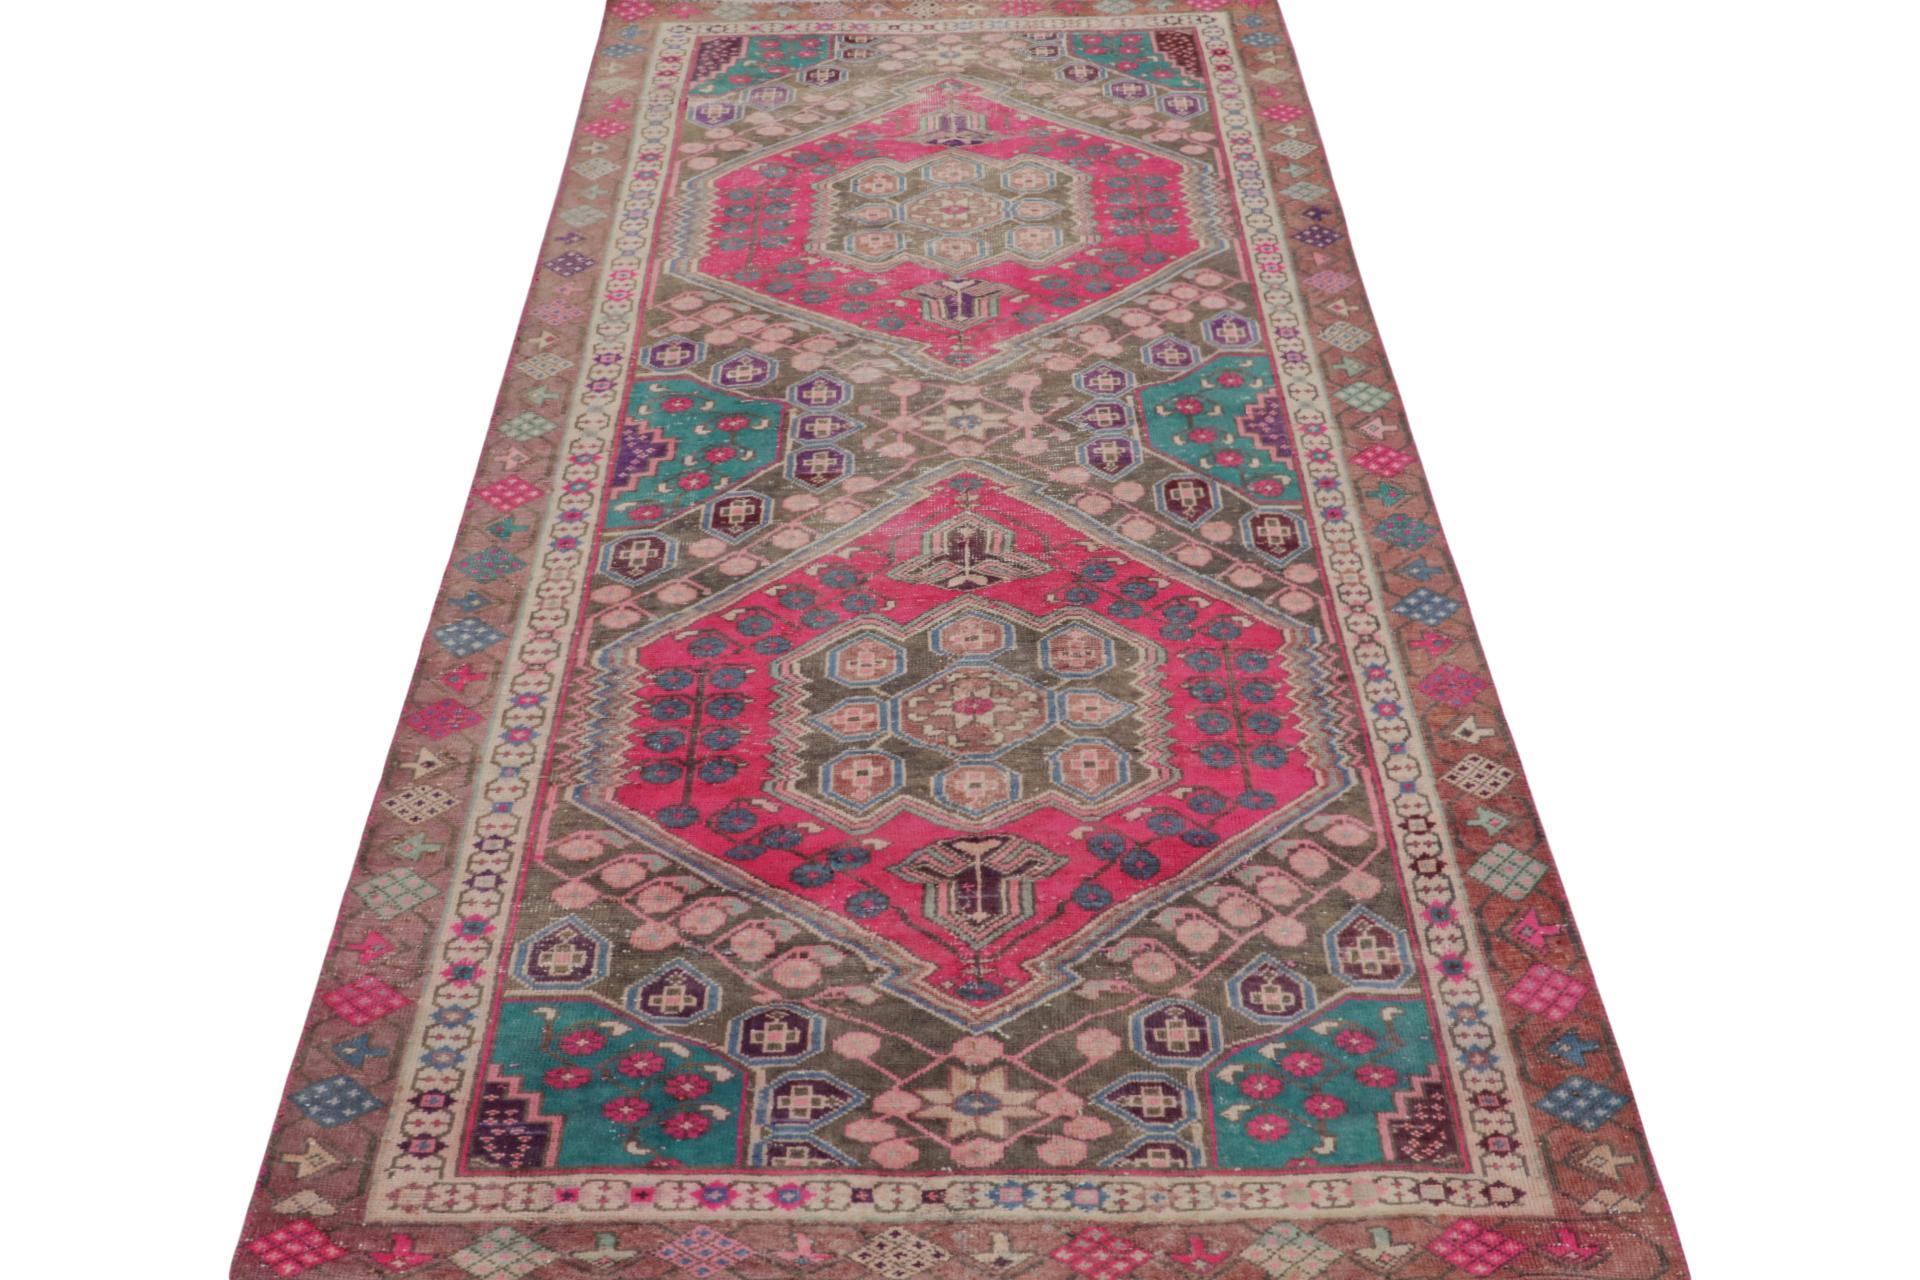 Tribal Vintage Persian Shiraz rug in Pink and Teal Floral Patterns by Rug & Kilim For Sale